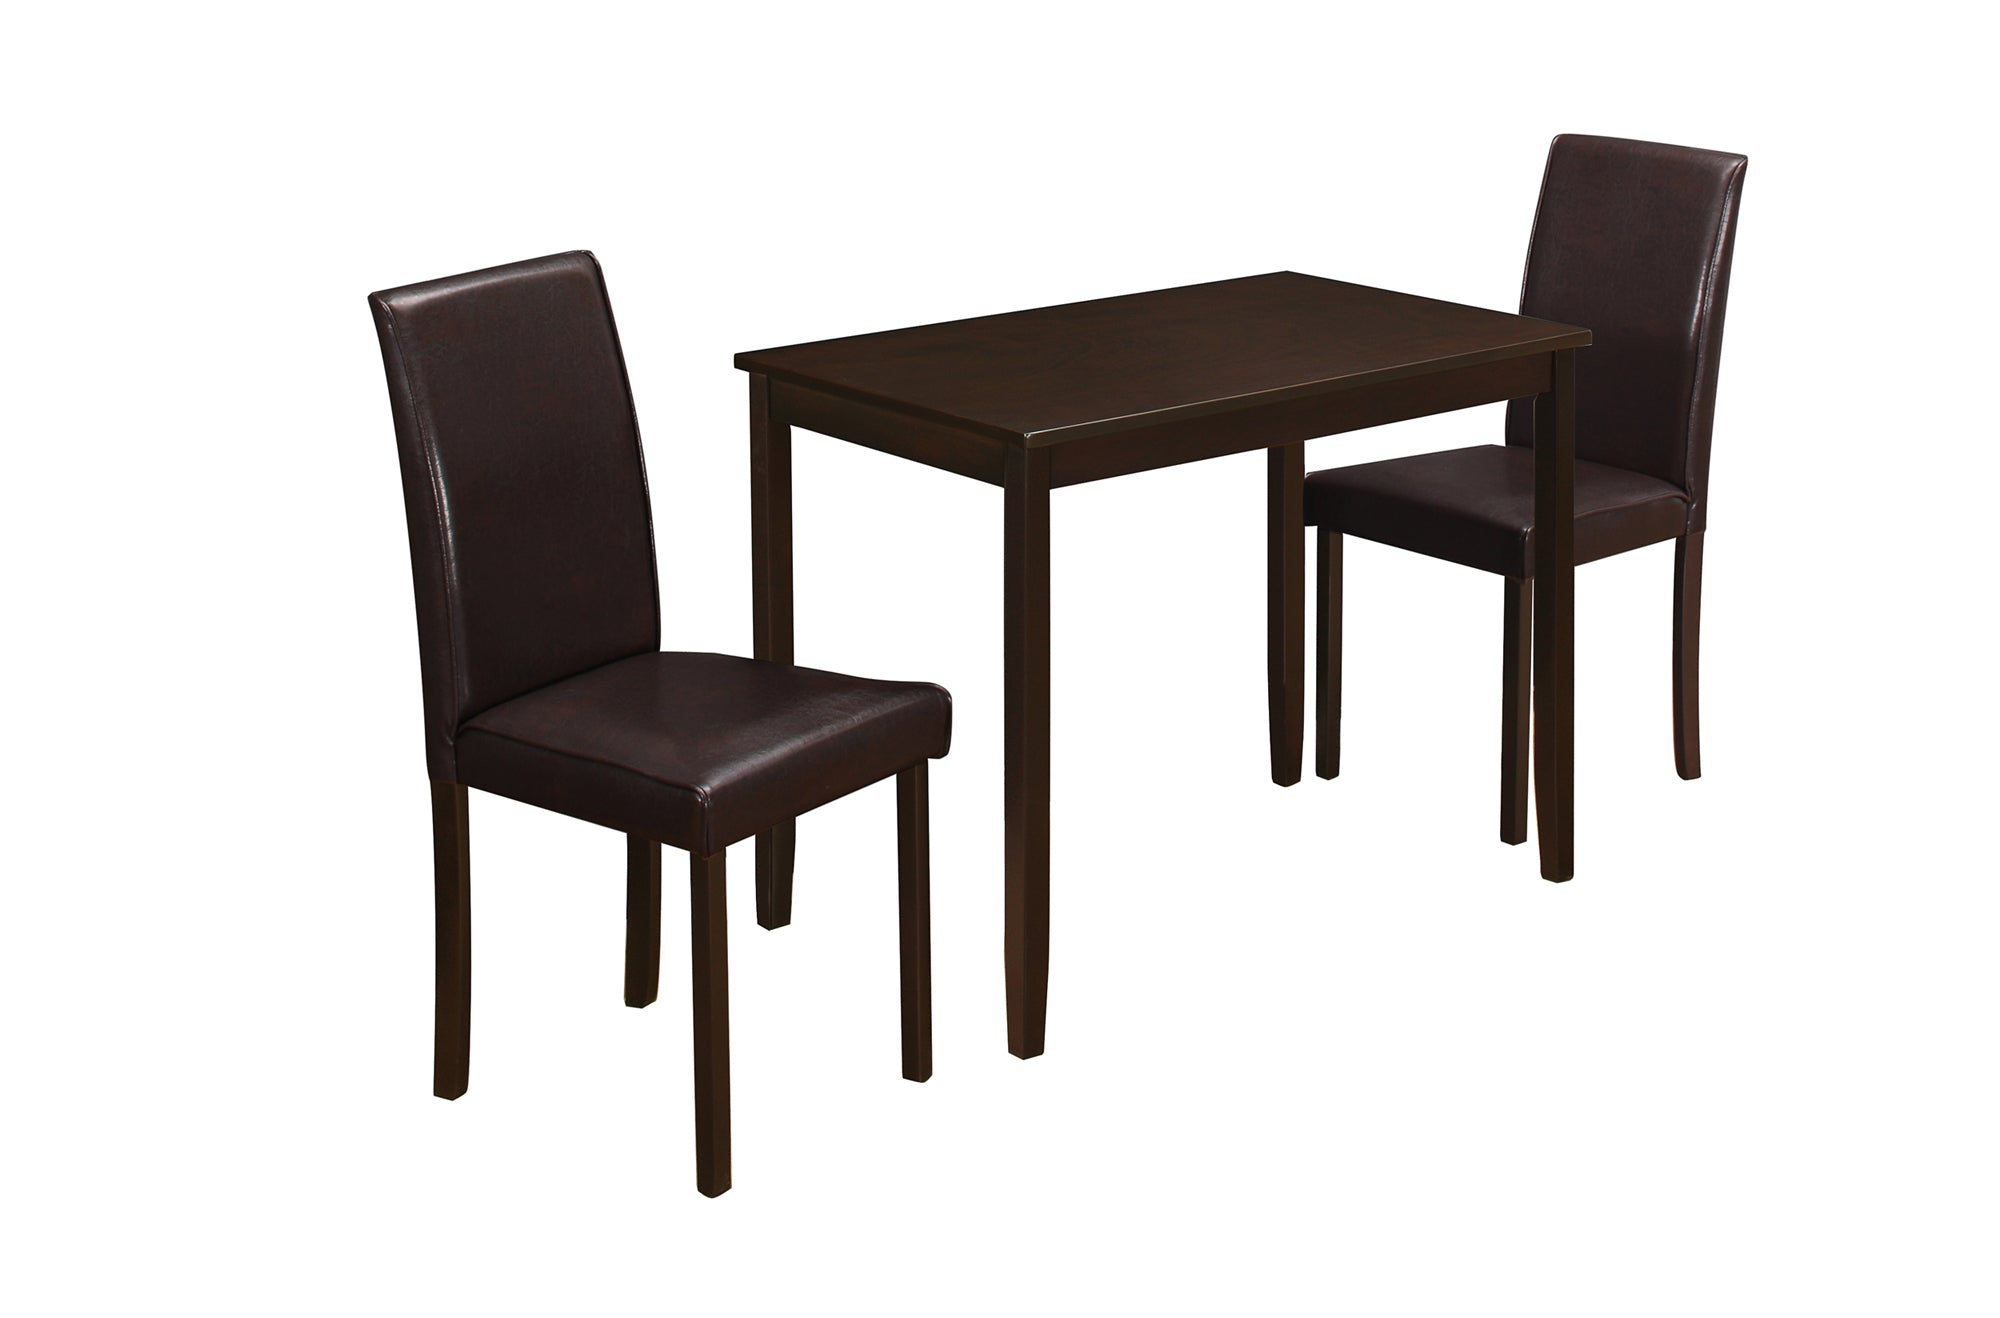 68" X 75" X 102" Cappuccino Solid Wood Foam Veneer Leatherlook 3Pcs Dining Set - Tuesday Morning-Dining Sets